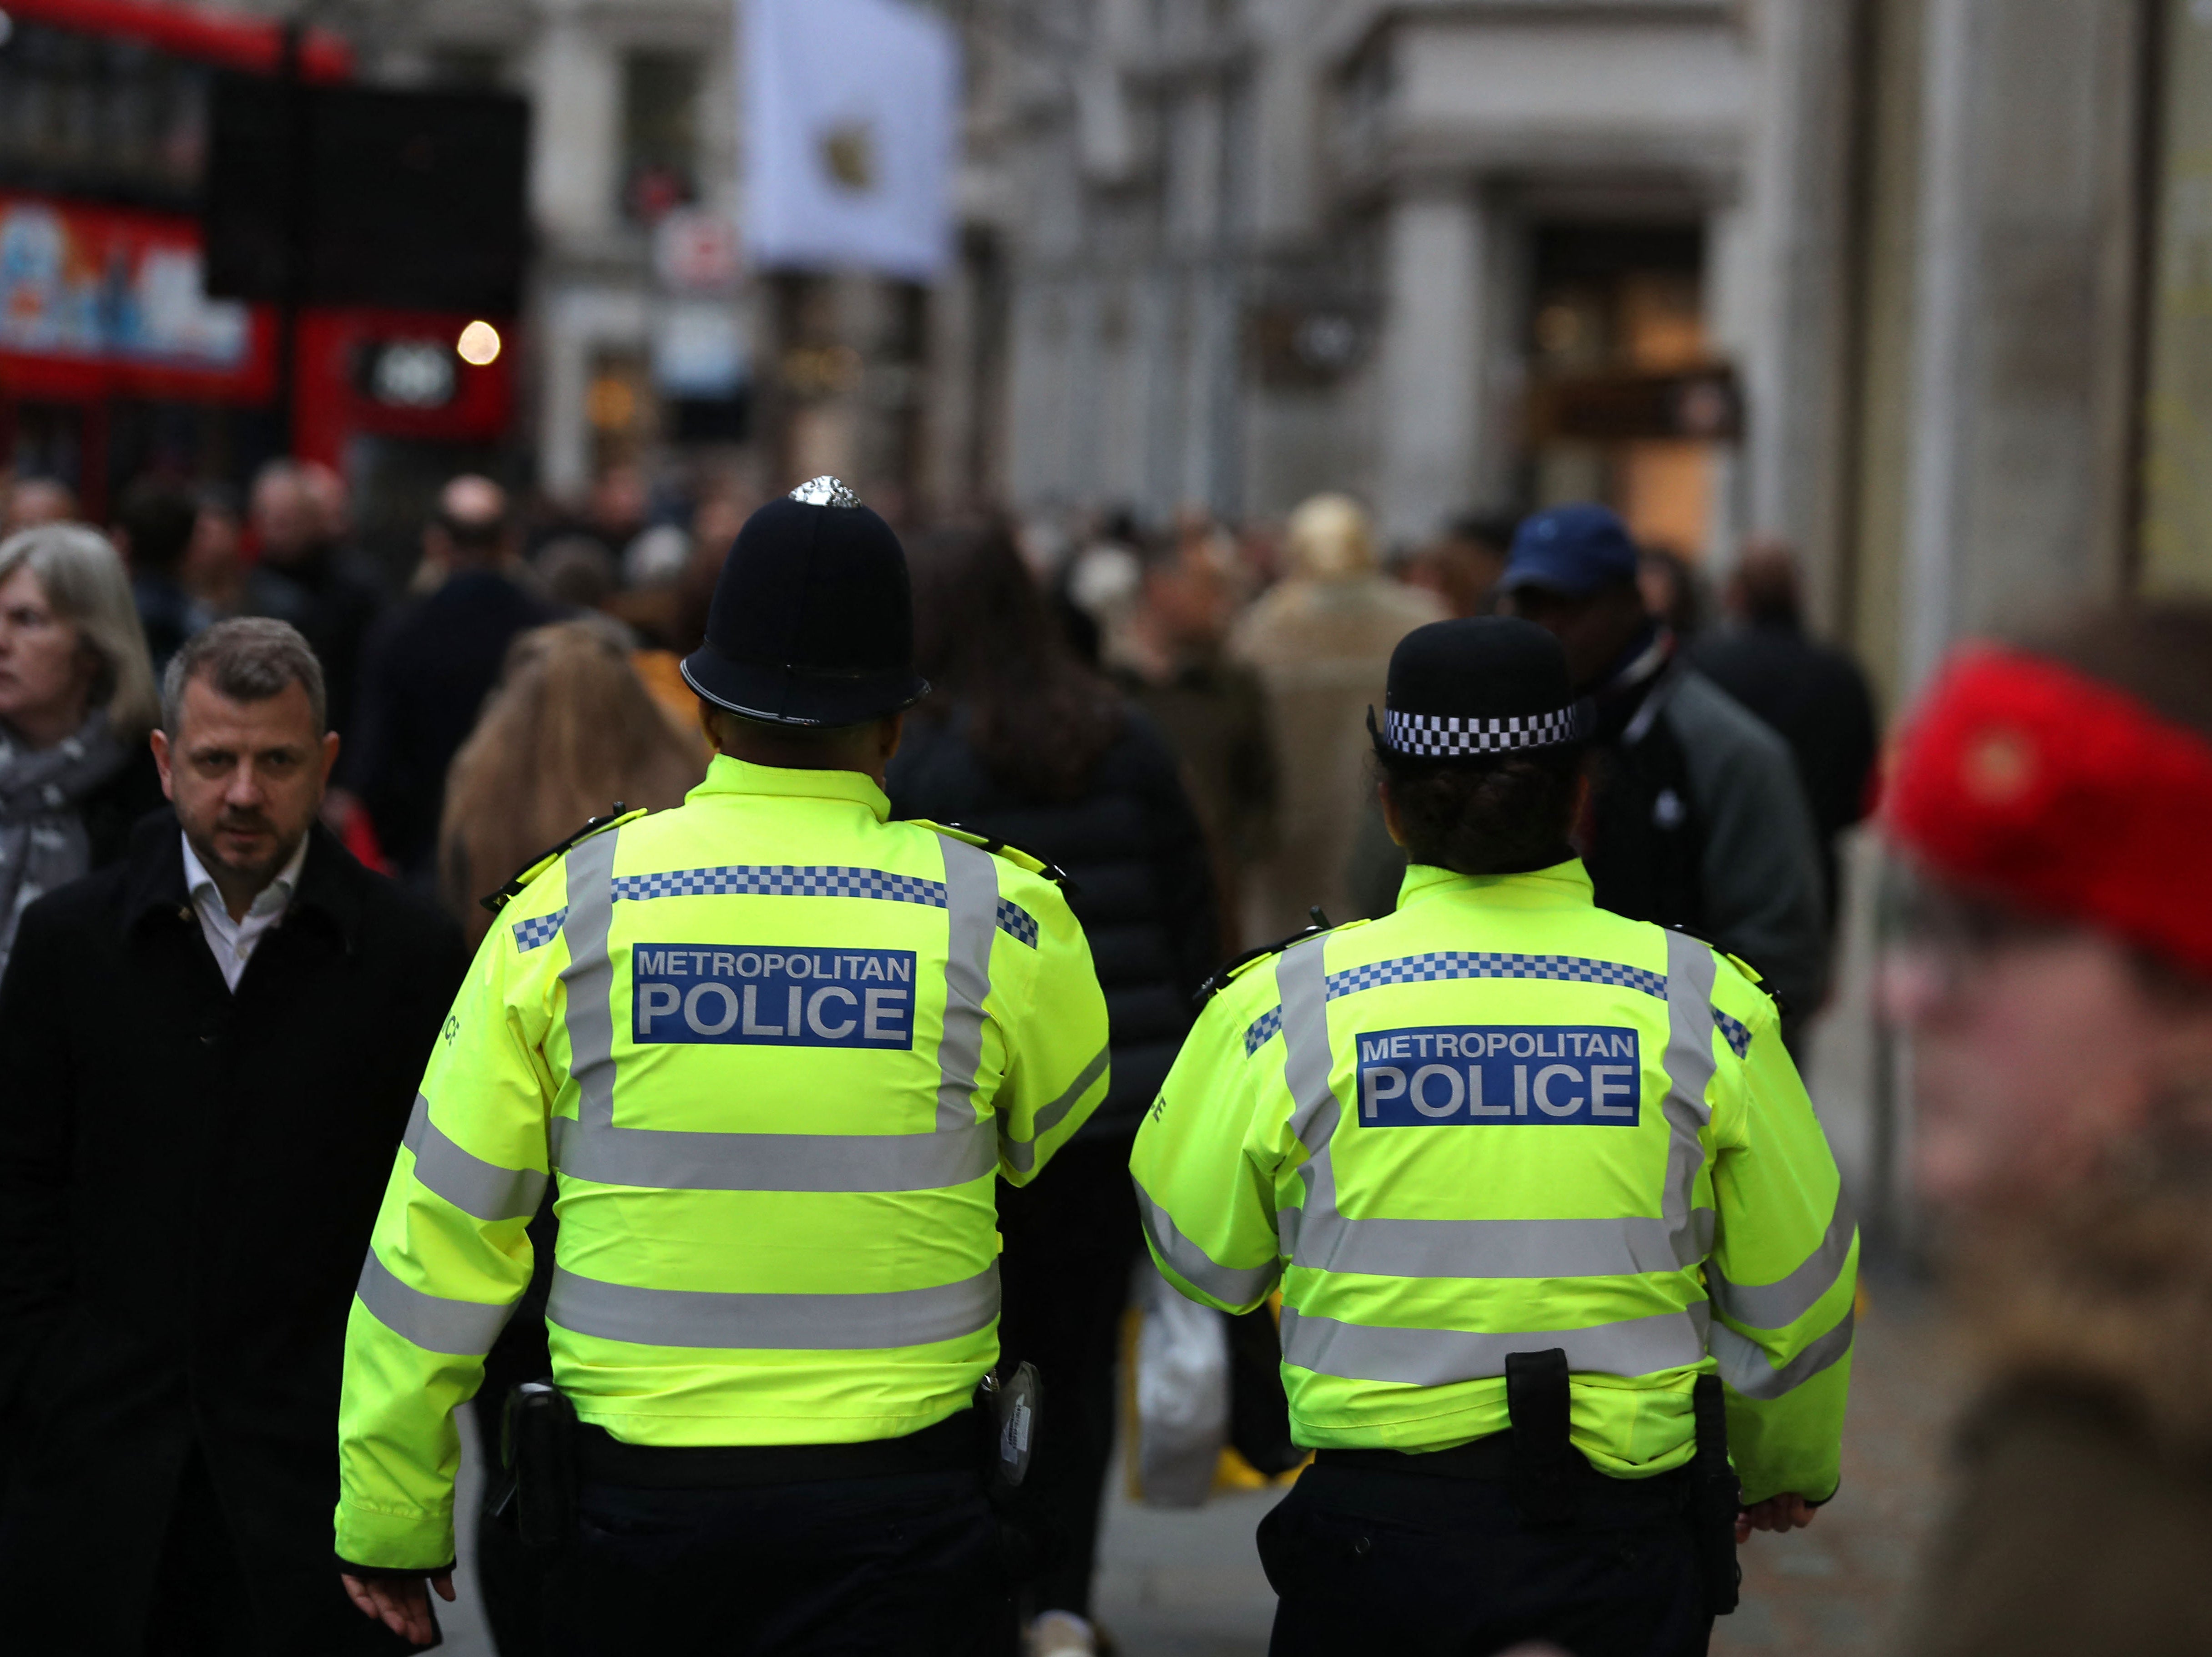 Police are stepping up patrols across London over the Christmas period following two terror attacks in the space of a month